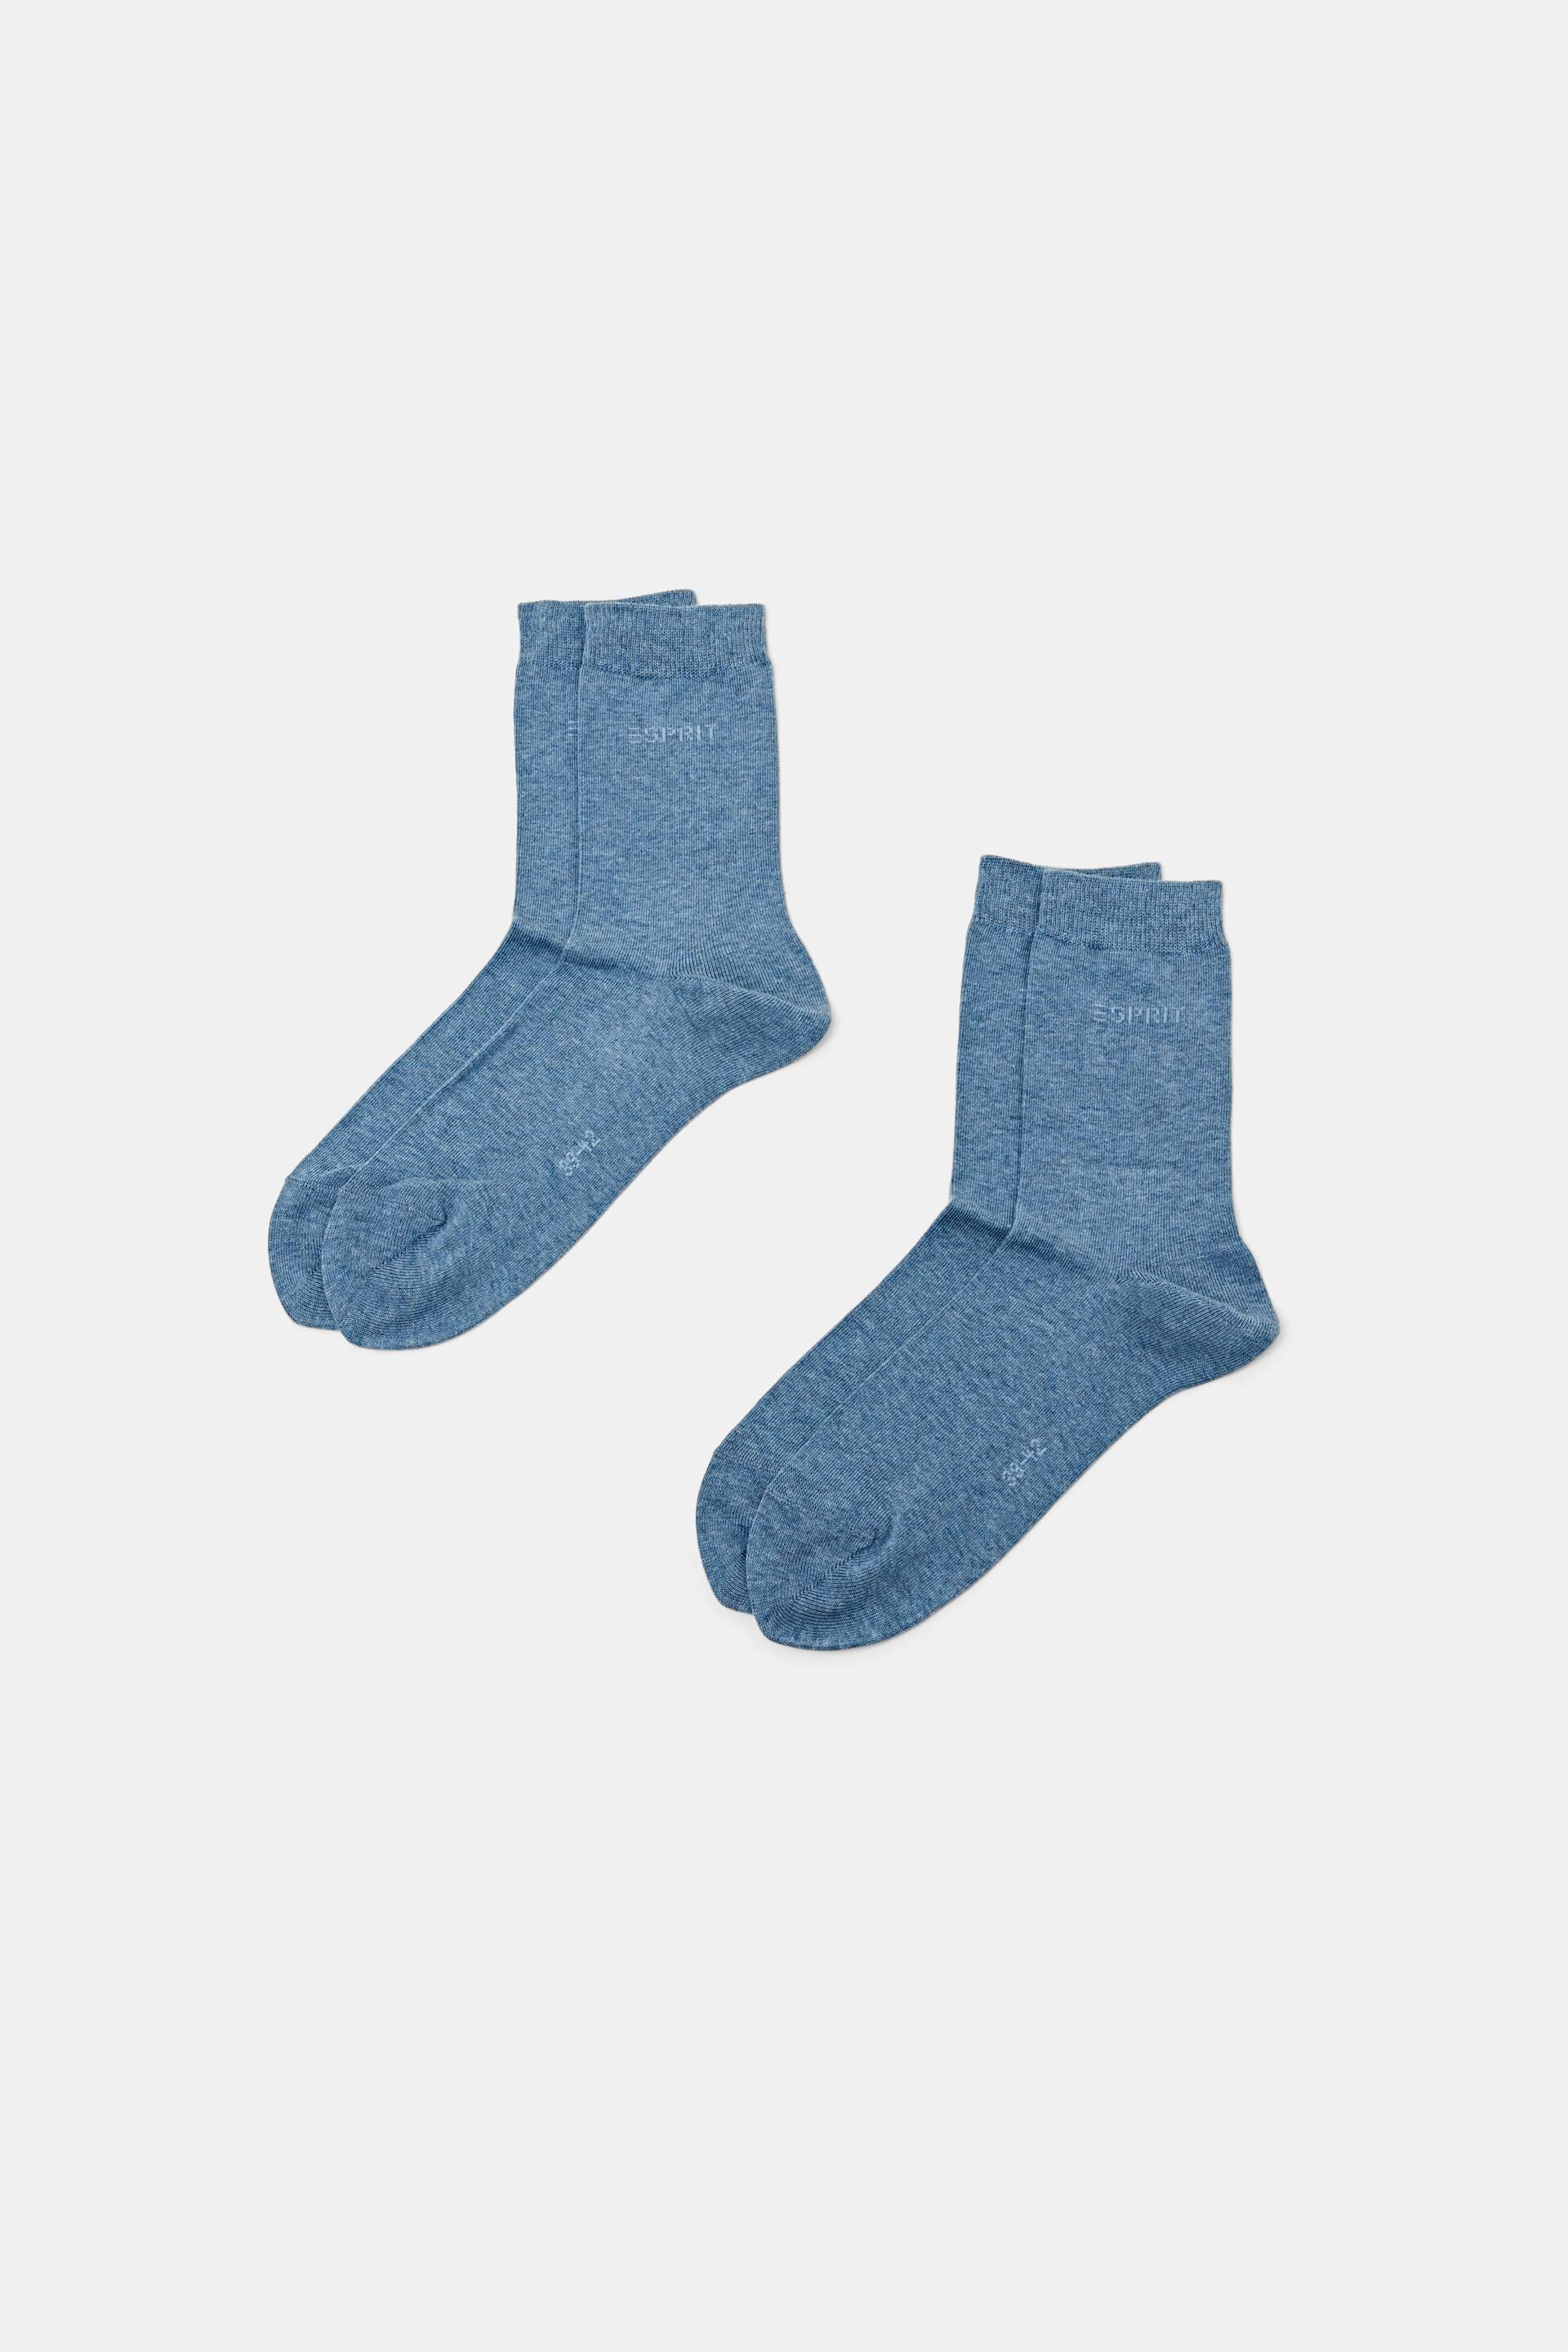 Esprit Online Store 2-pack of socks with knitted cotton organic logo